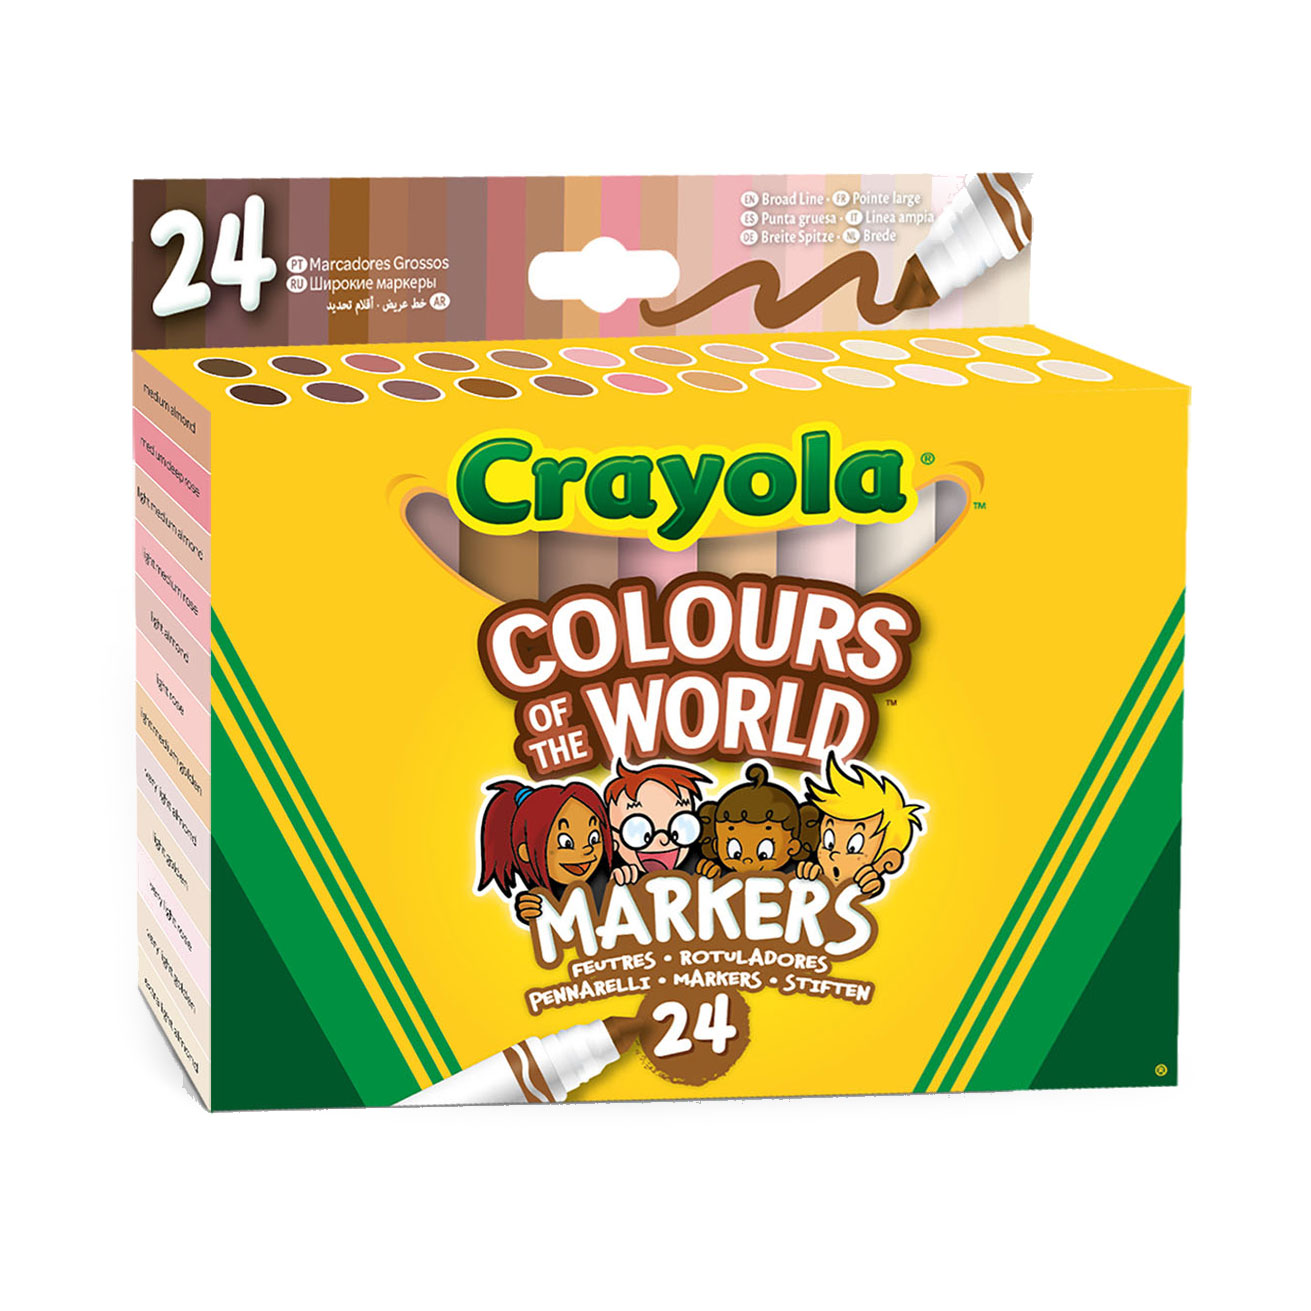 HOW TO COLOR SKIN with CRAYOLA COLORS OF THE WORLD Colored Pencils